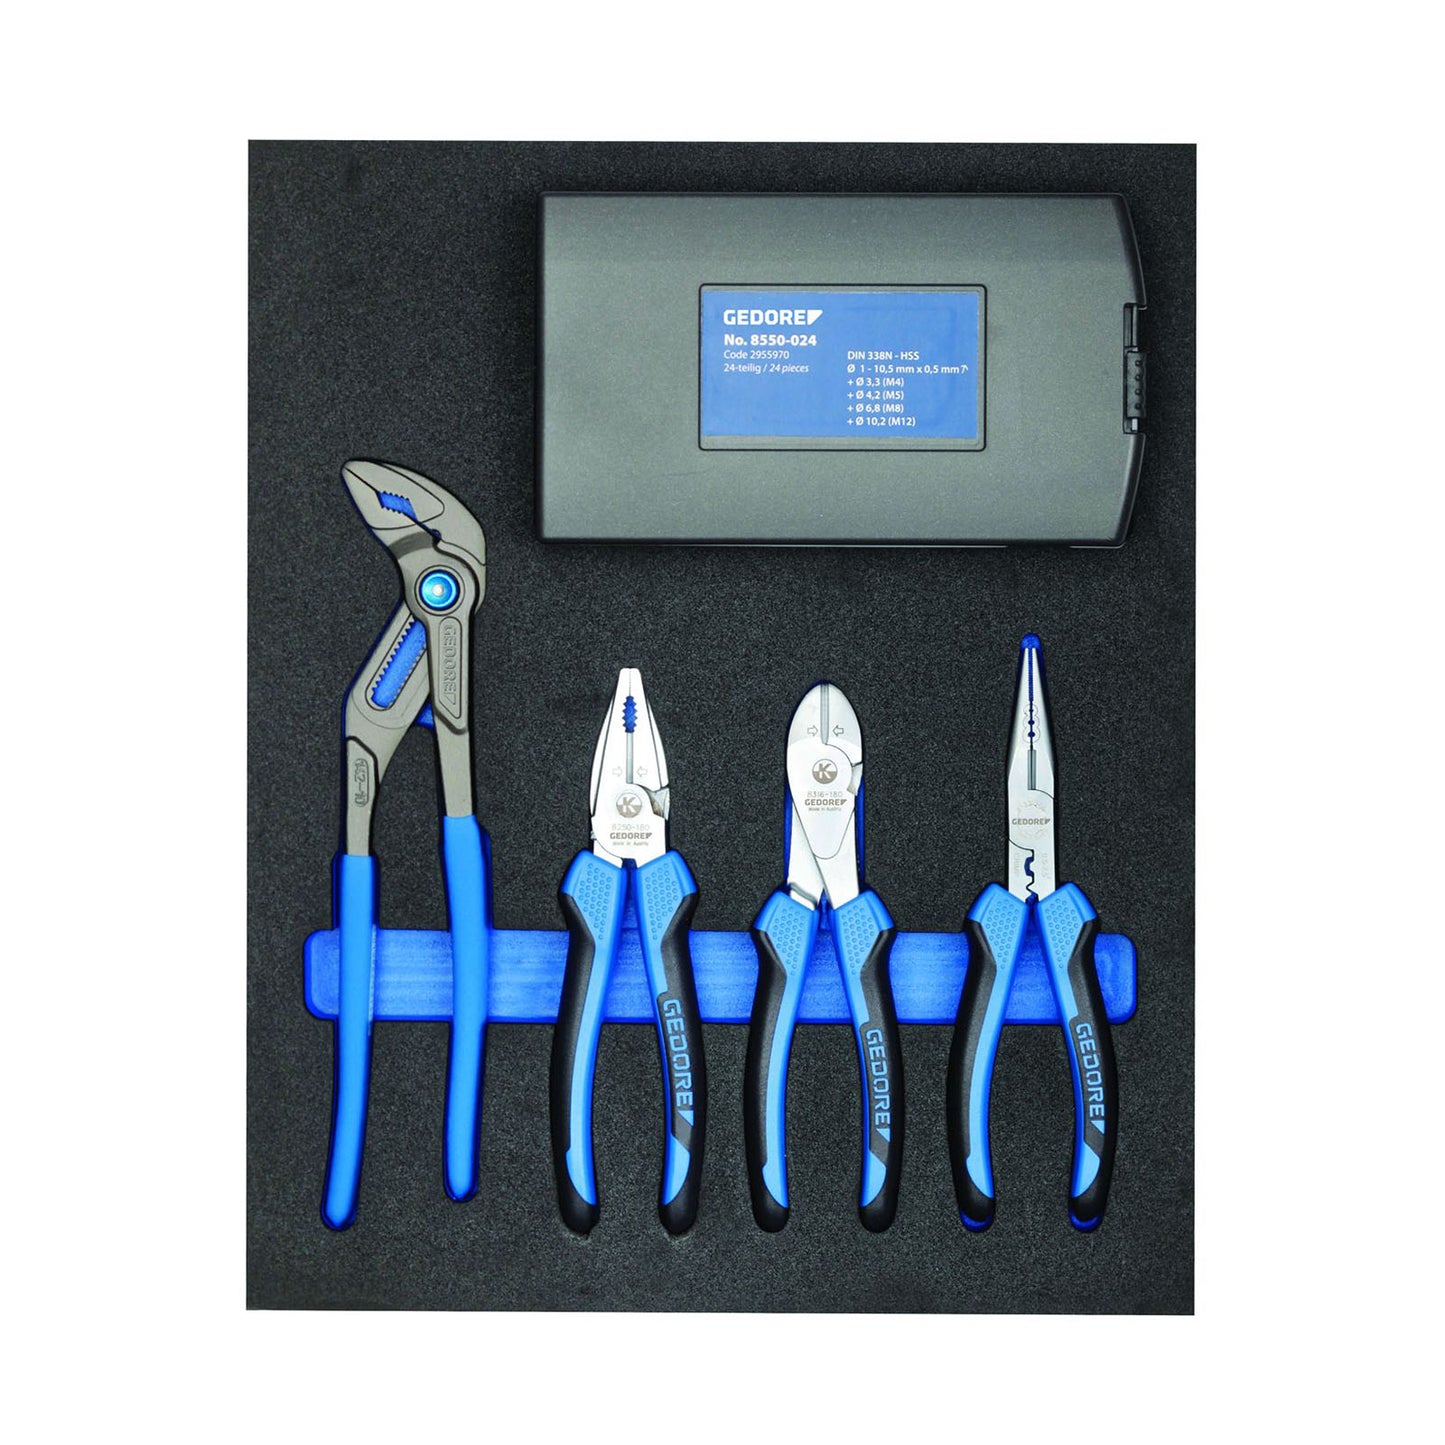 GEDORE TS CT2-142 - CT2 Foam Module with Pliers and Drill Bit Set (2957248)